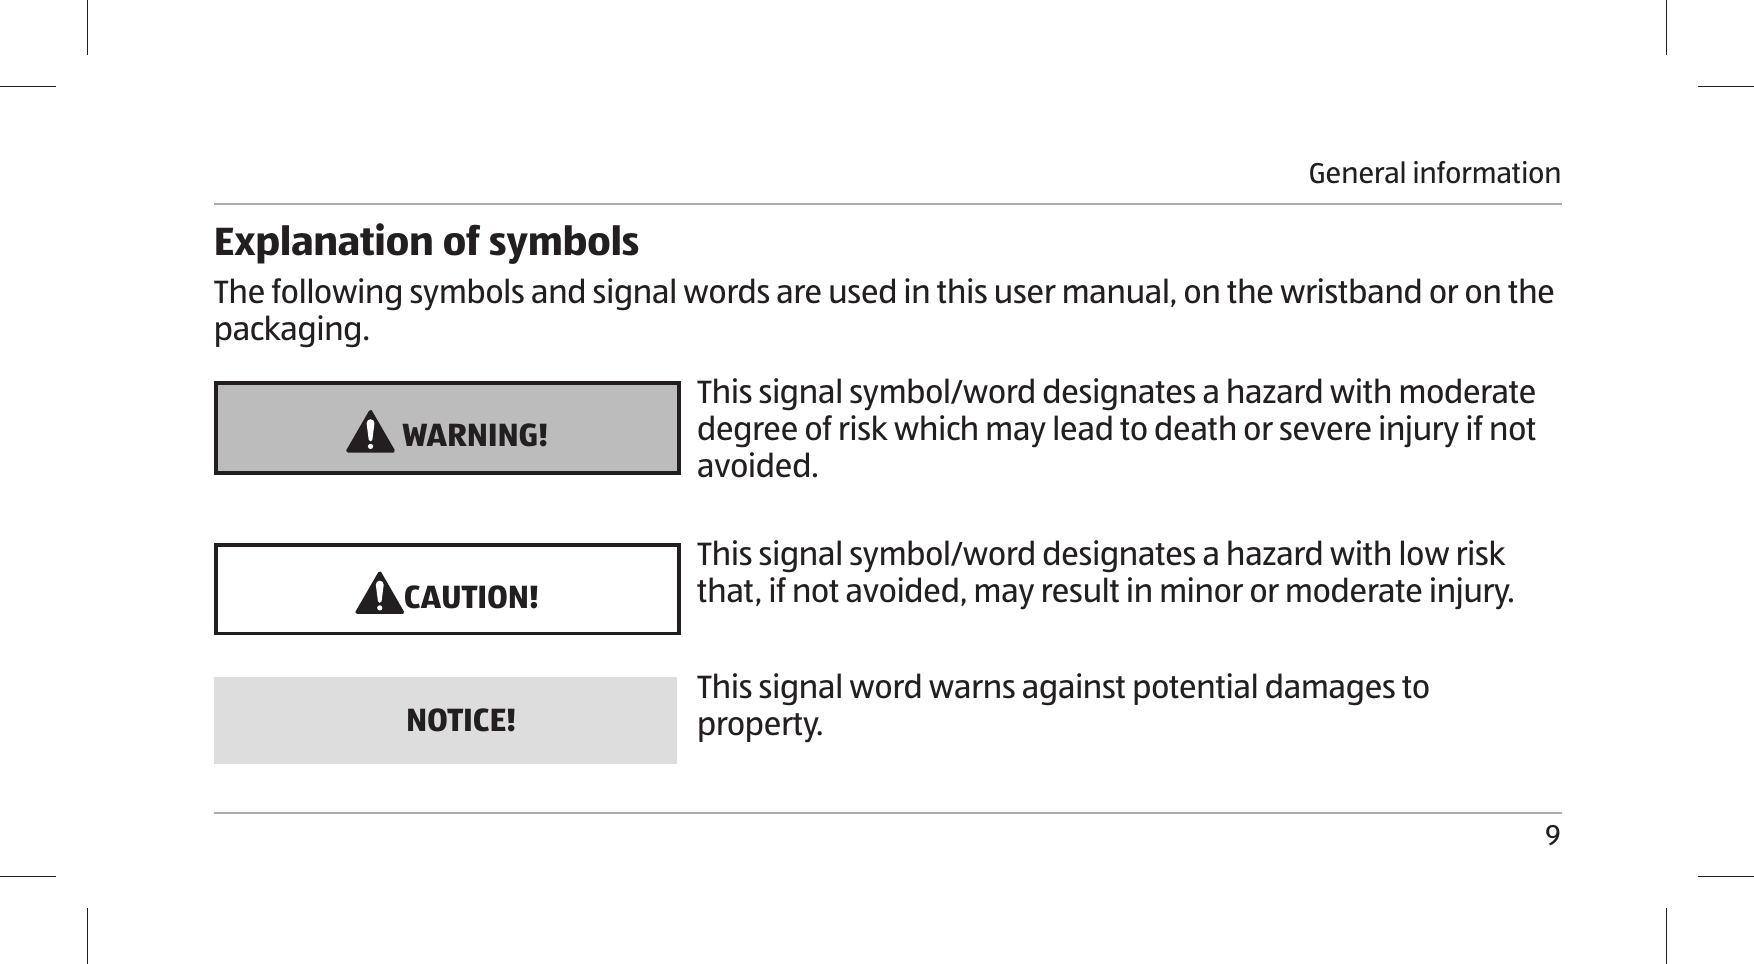 General information9Explanation of symbolsThe following symbols and signal words are used in this user manual, on the wristband or on the packaging.  WARNING!This signal symbol/word designates a hazard with moderate degree of risk which may lead to death or severe injury if not avoided.CAUTION!This signal symbol/word designates a hazard with low risk that, if not avoided, may result in minor or moderate injury.NOTICE! This signal word warns against potential damages to property.